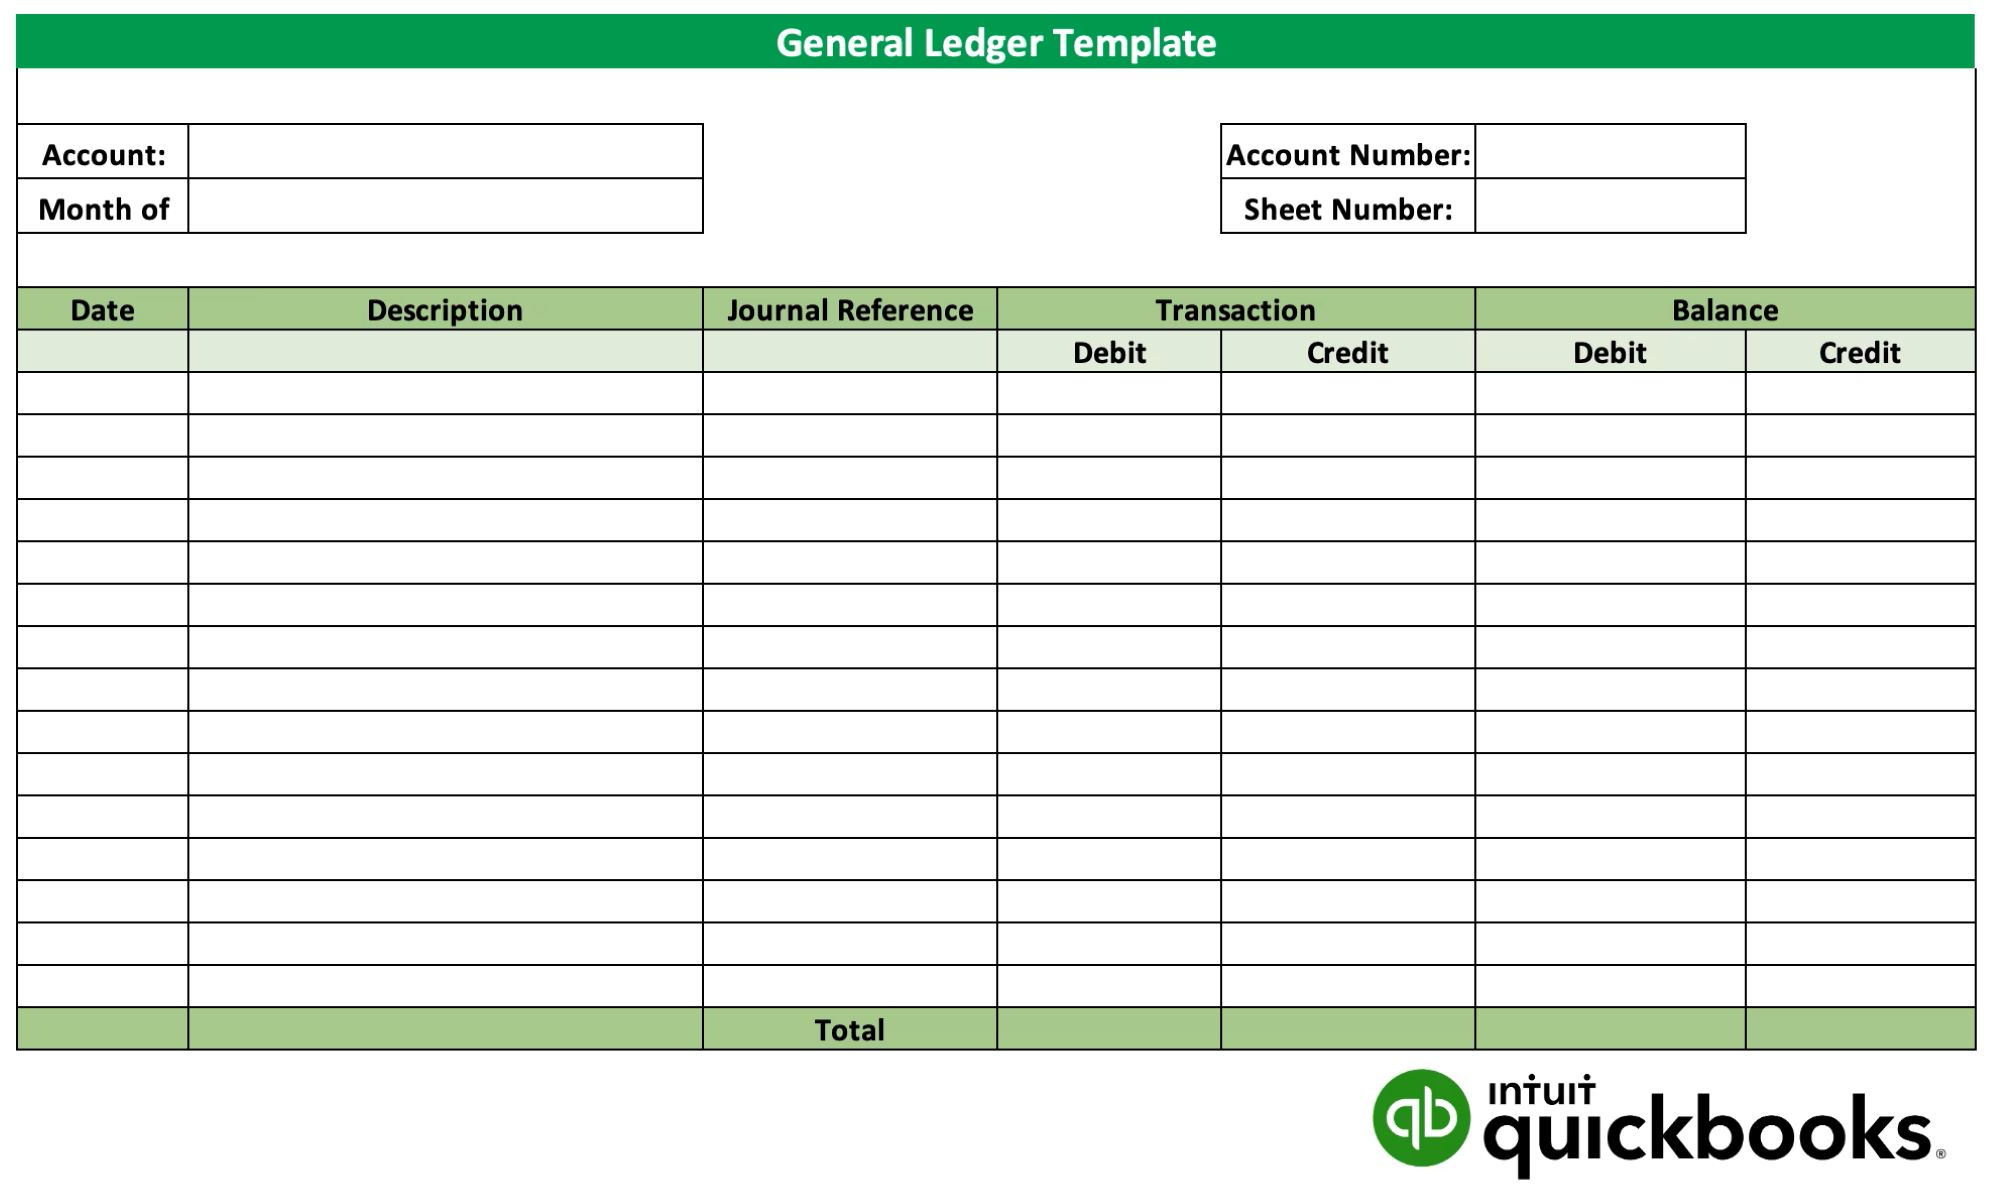 What Is General Ledger In Quickbooks